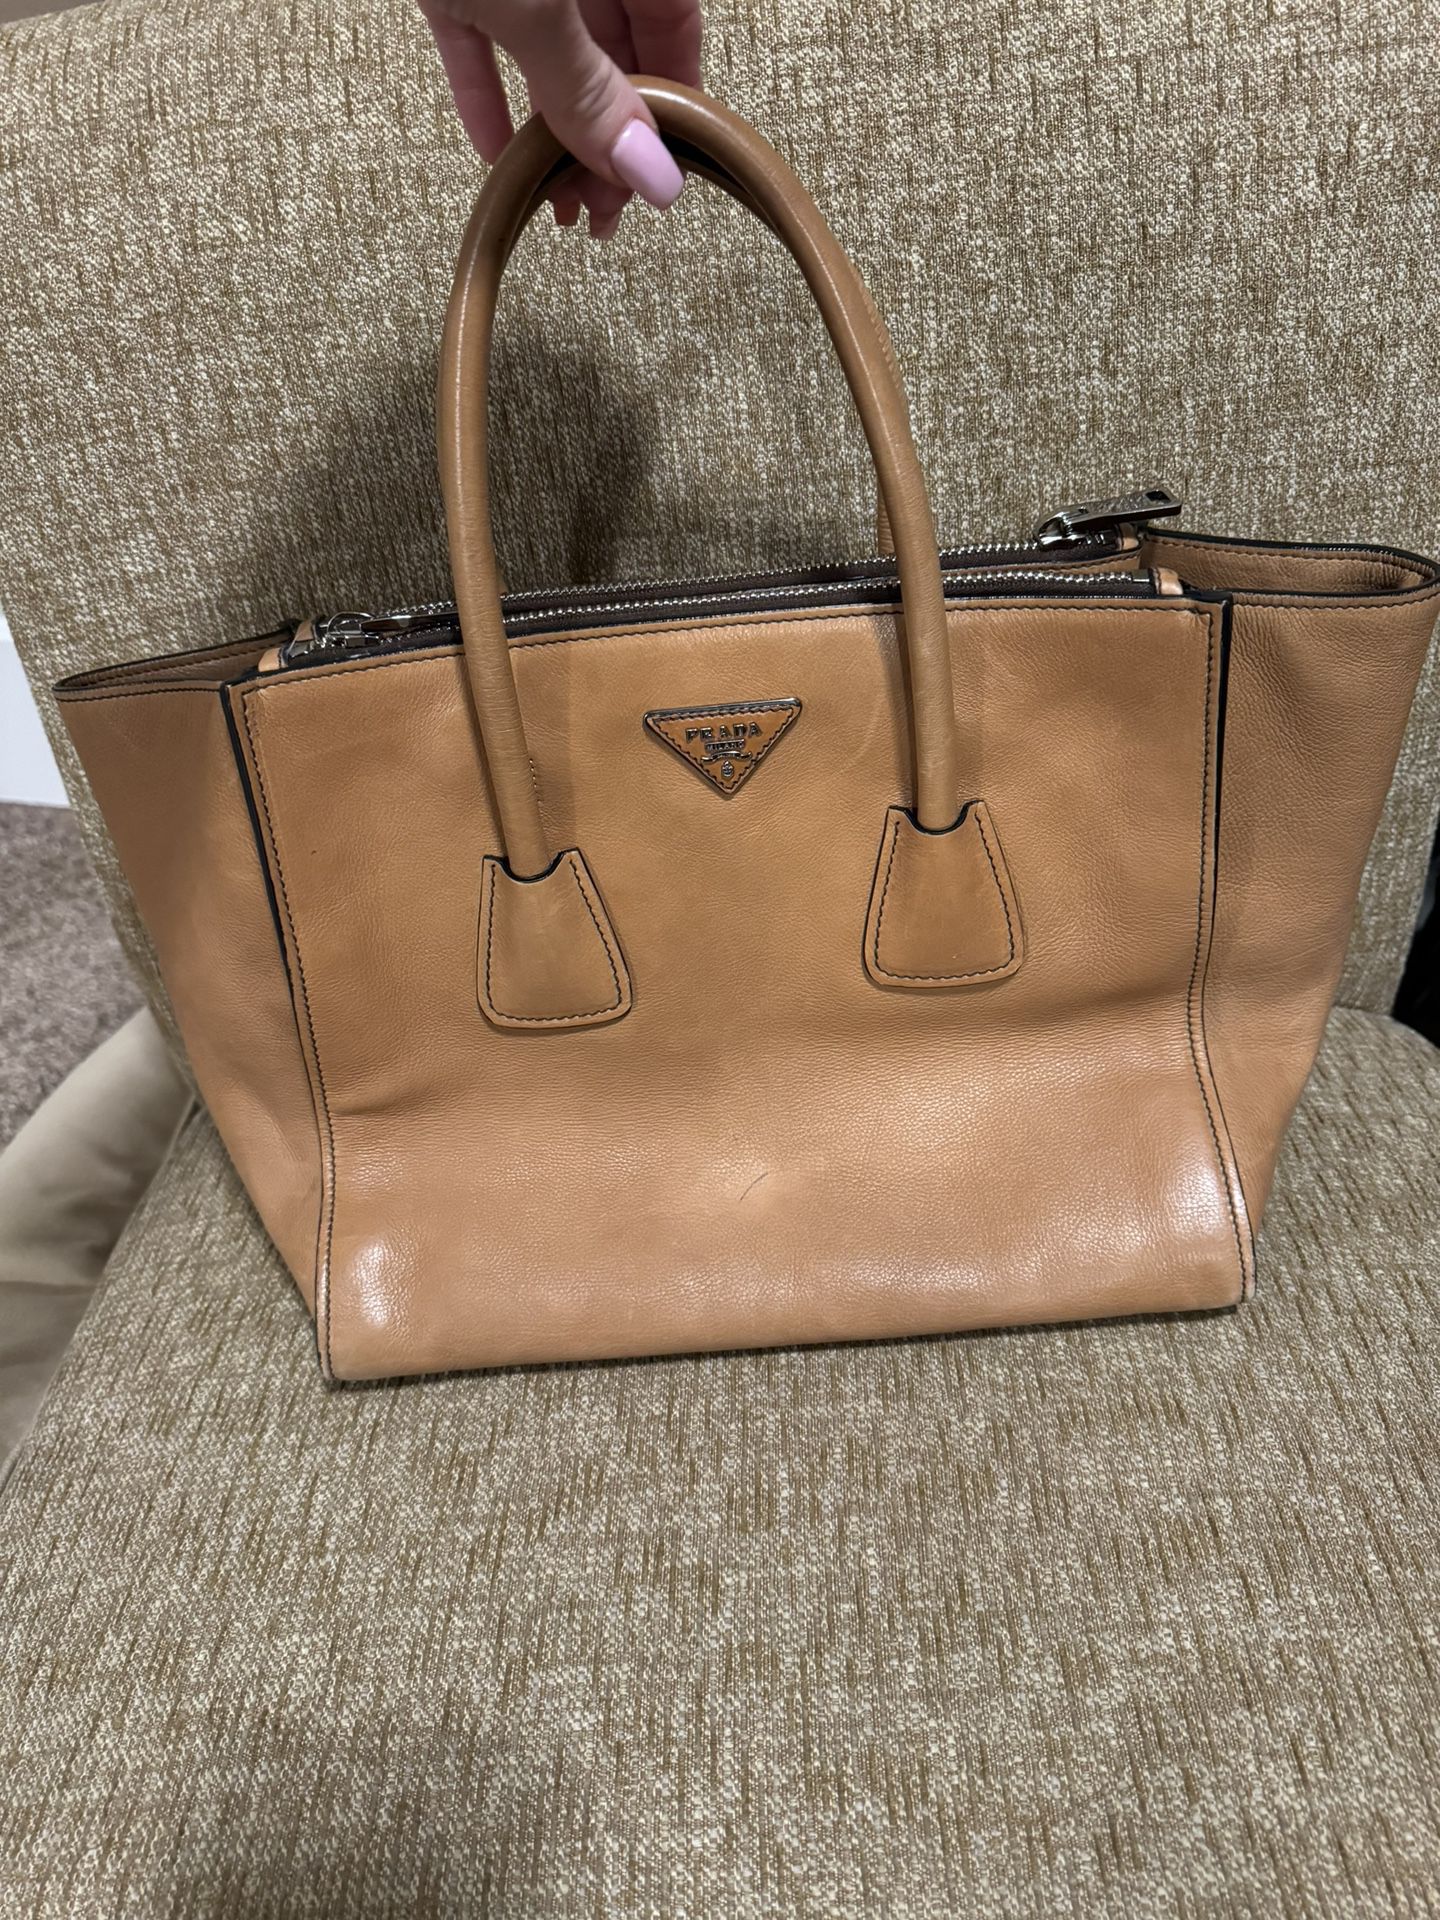 ❤️ MOTHER’S DAY SPECIAL! AUTHENTIC Prada Glacé Calf  Twin Pocket Tote Purse  Nice full leather bag 